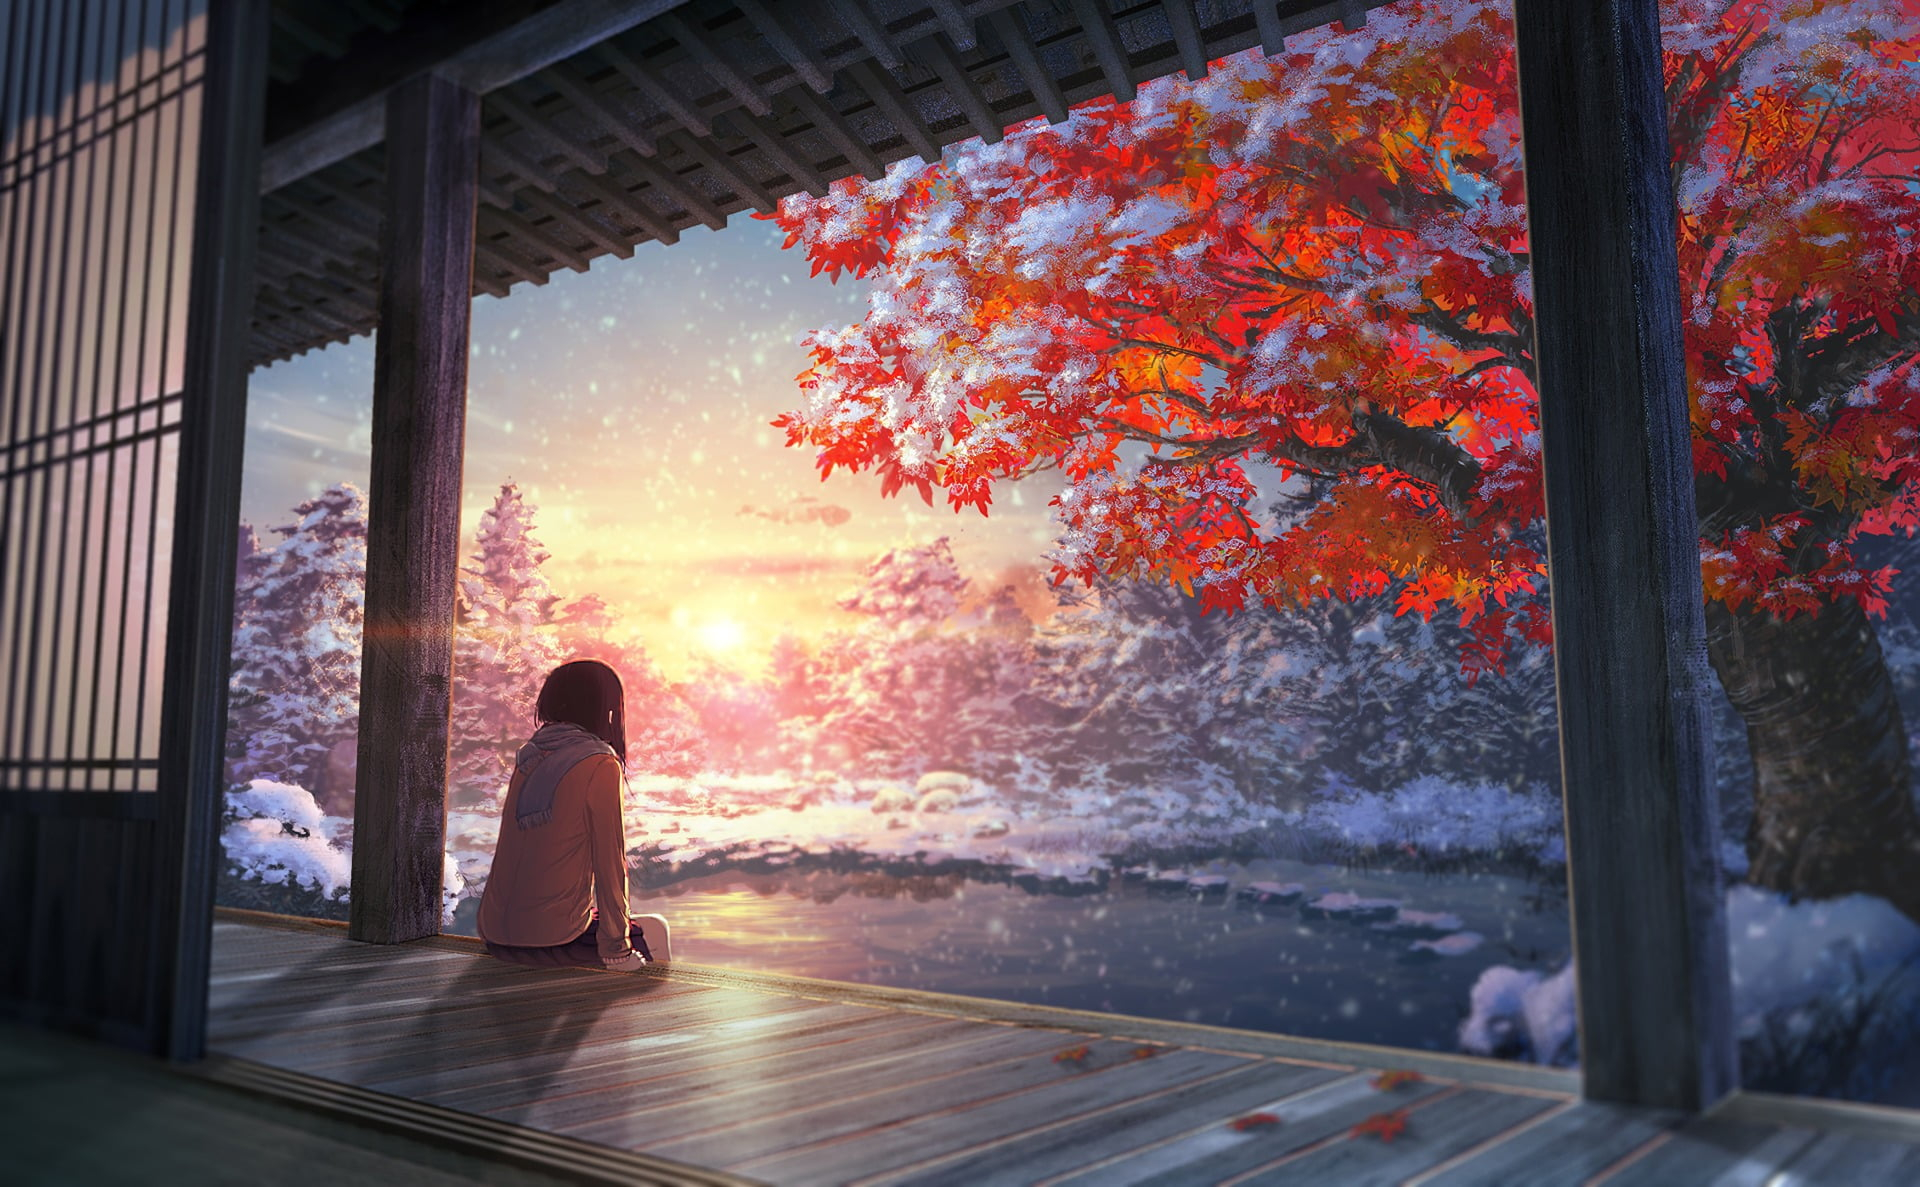 Anime wallpaper, anime girls, artwork, tree, one person, rear view, nature